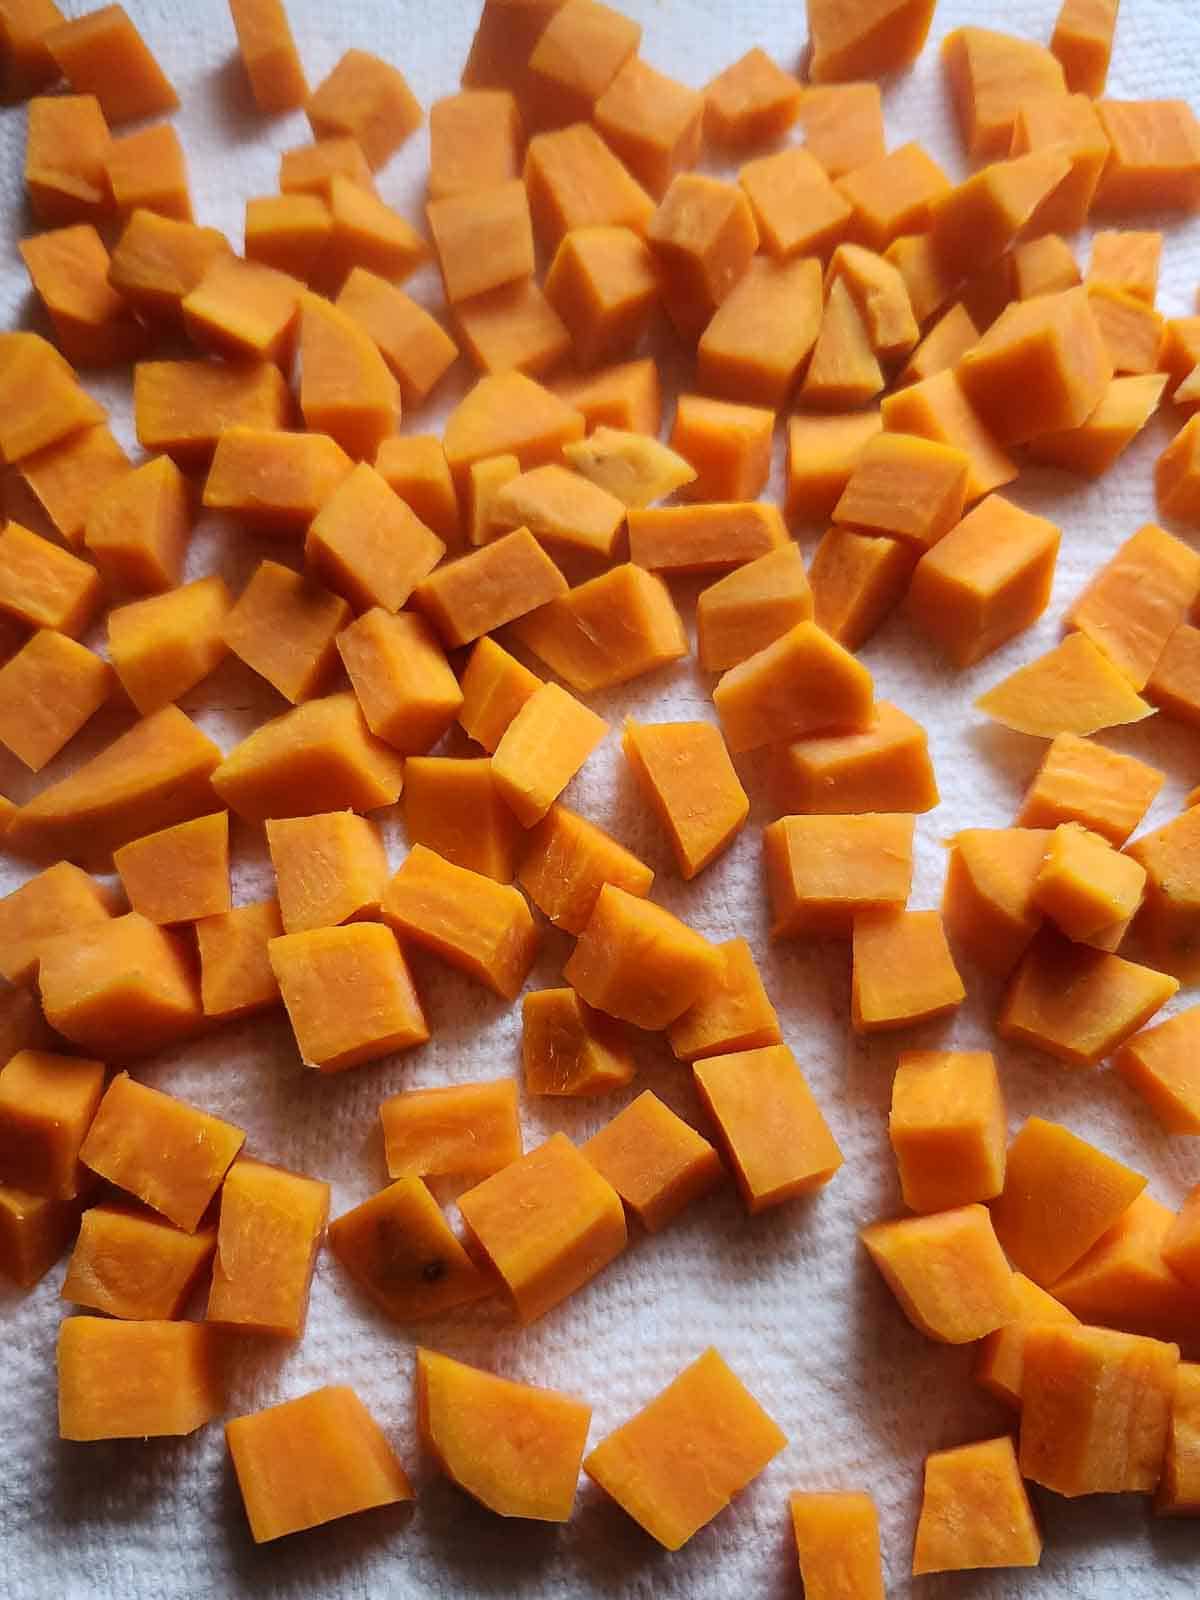 Sweet potato cubes drying on a paper towel.